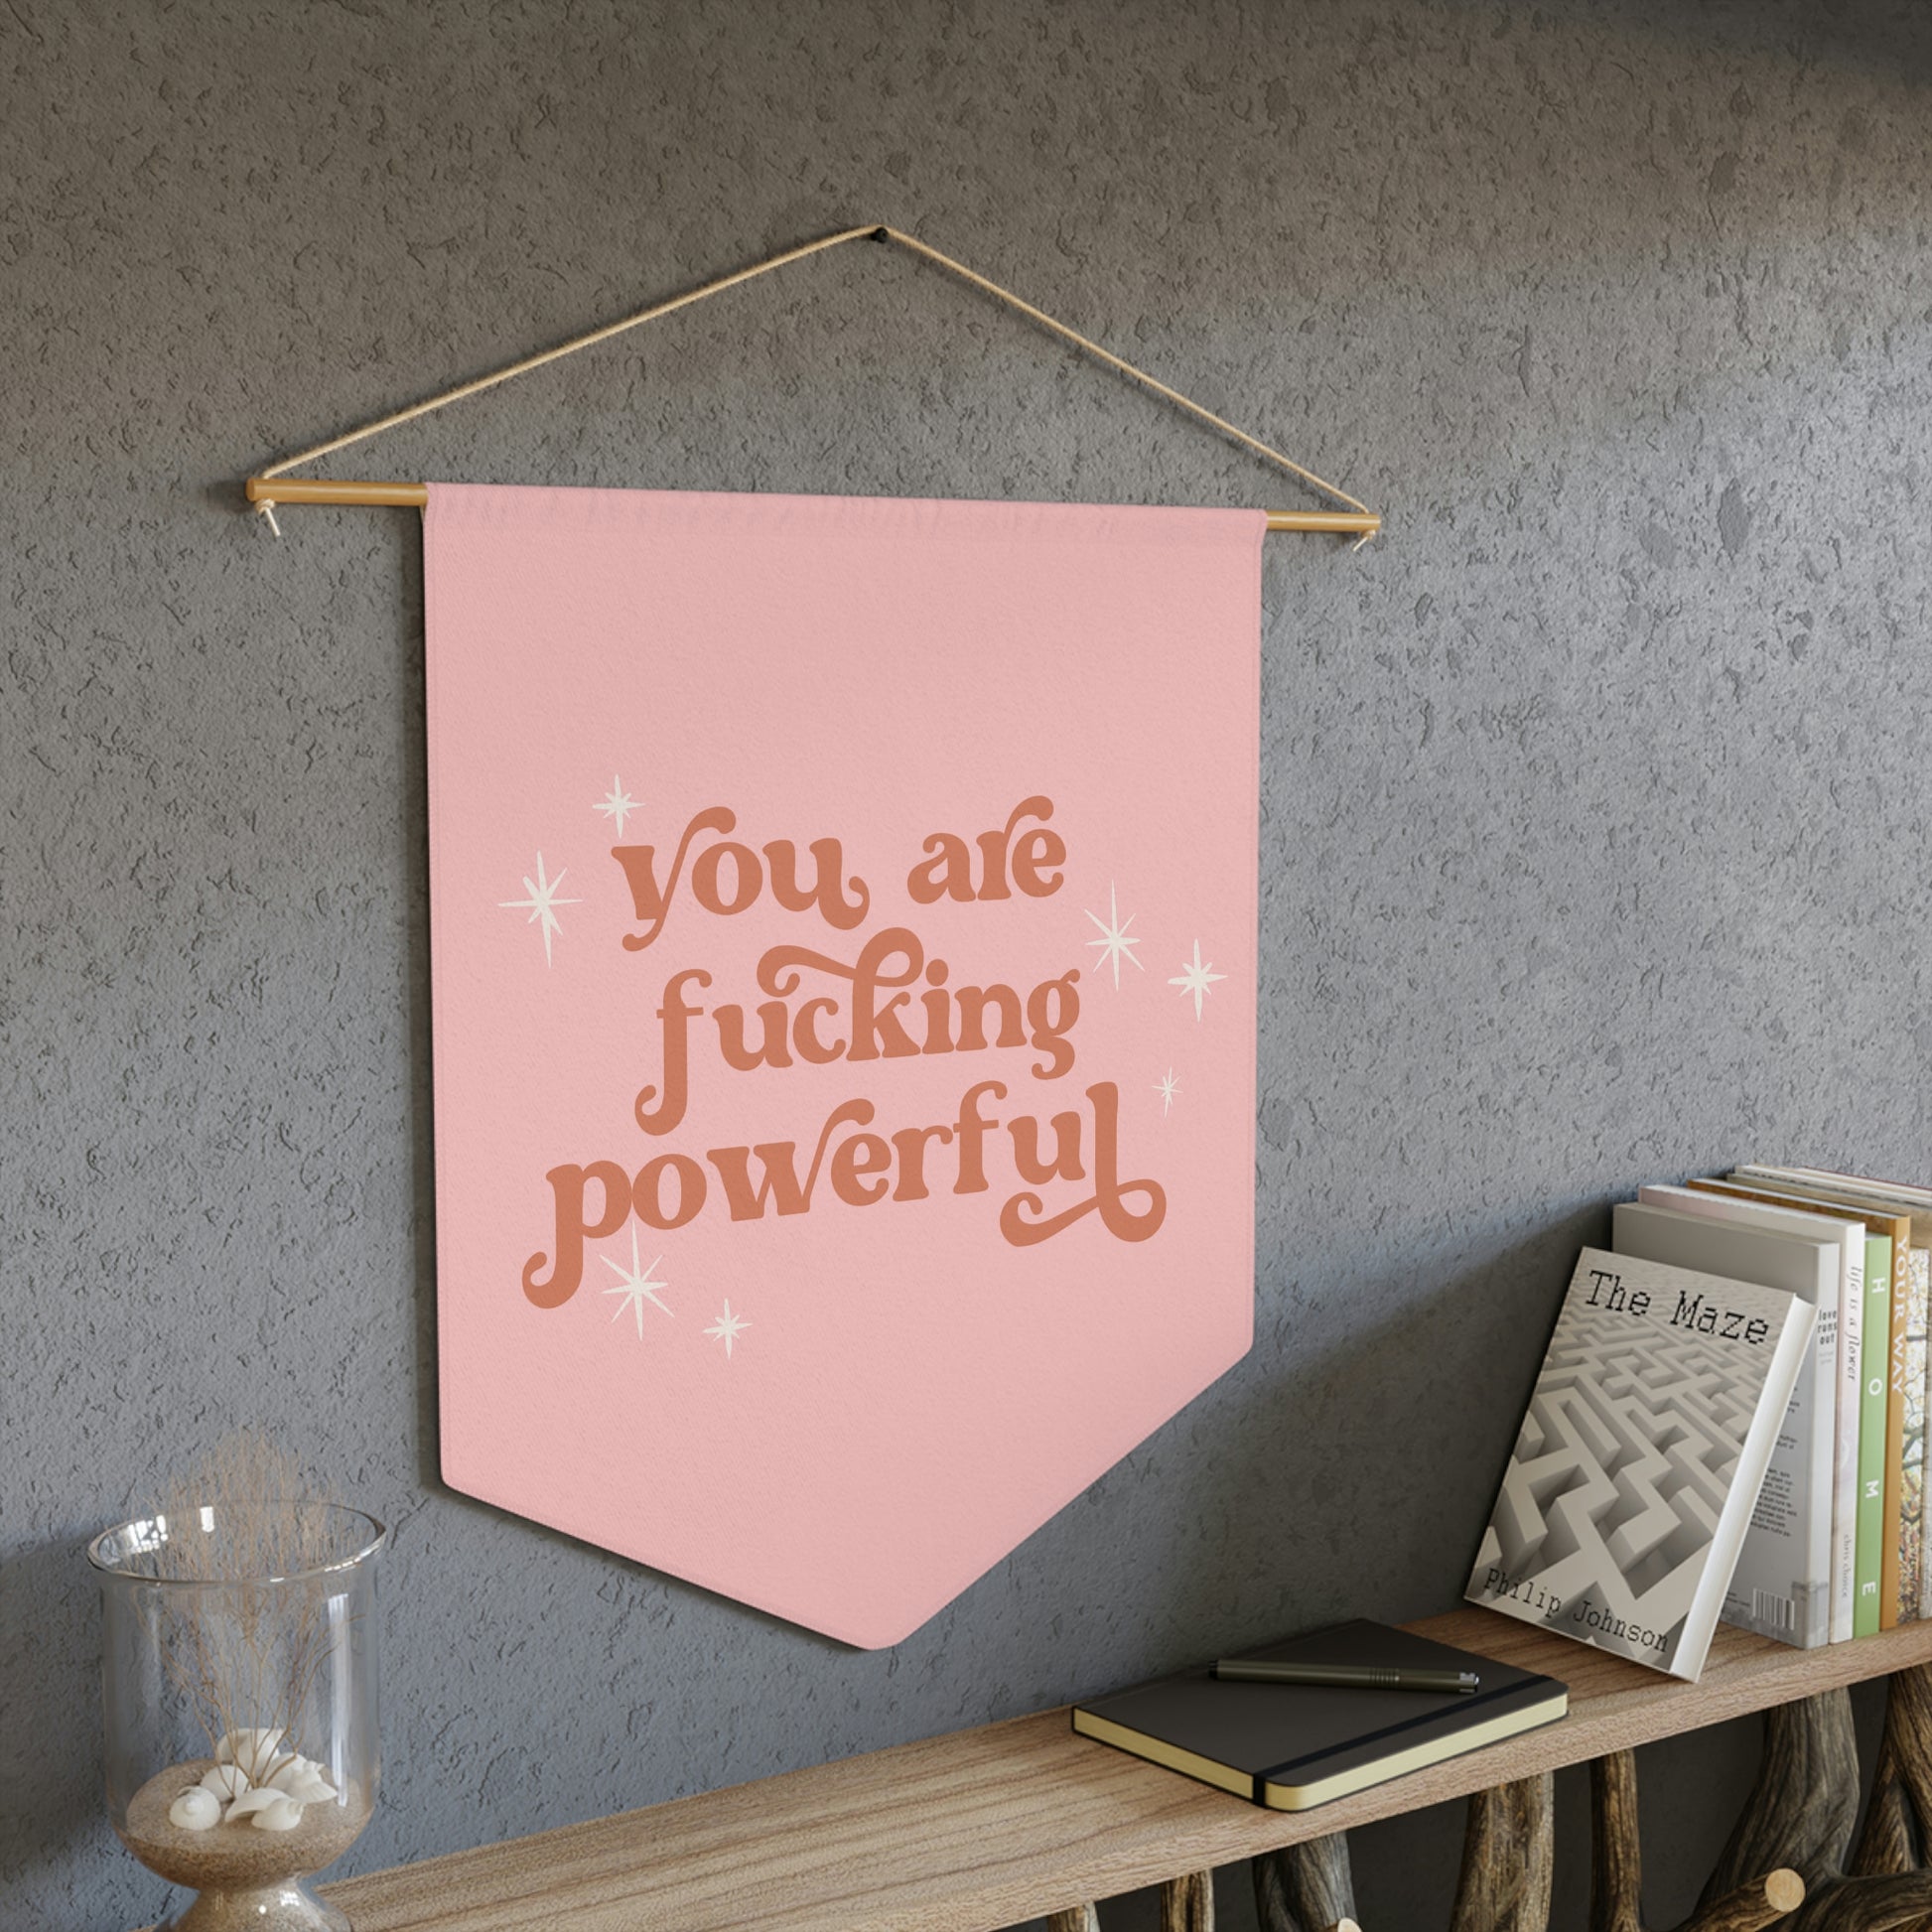 You are fucking powerful pennant wall hanging - Bad Perfectionist Co.